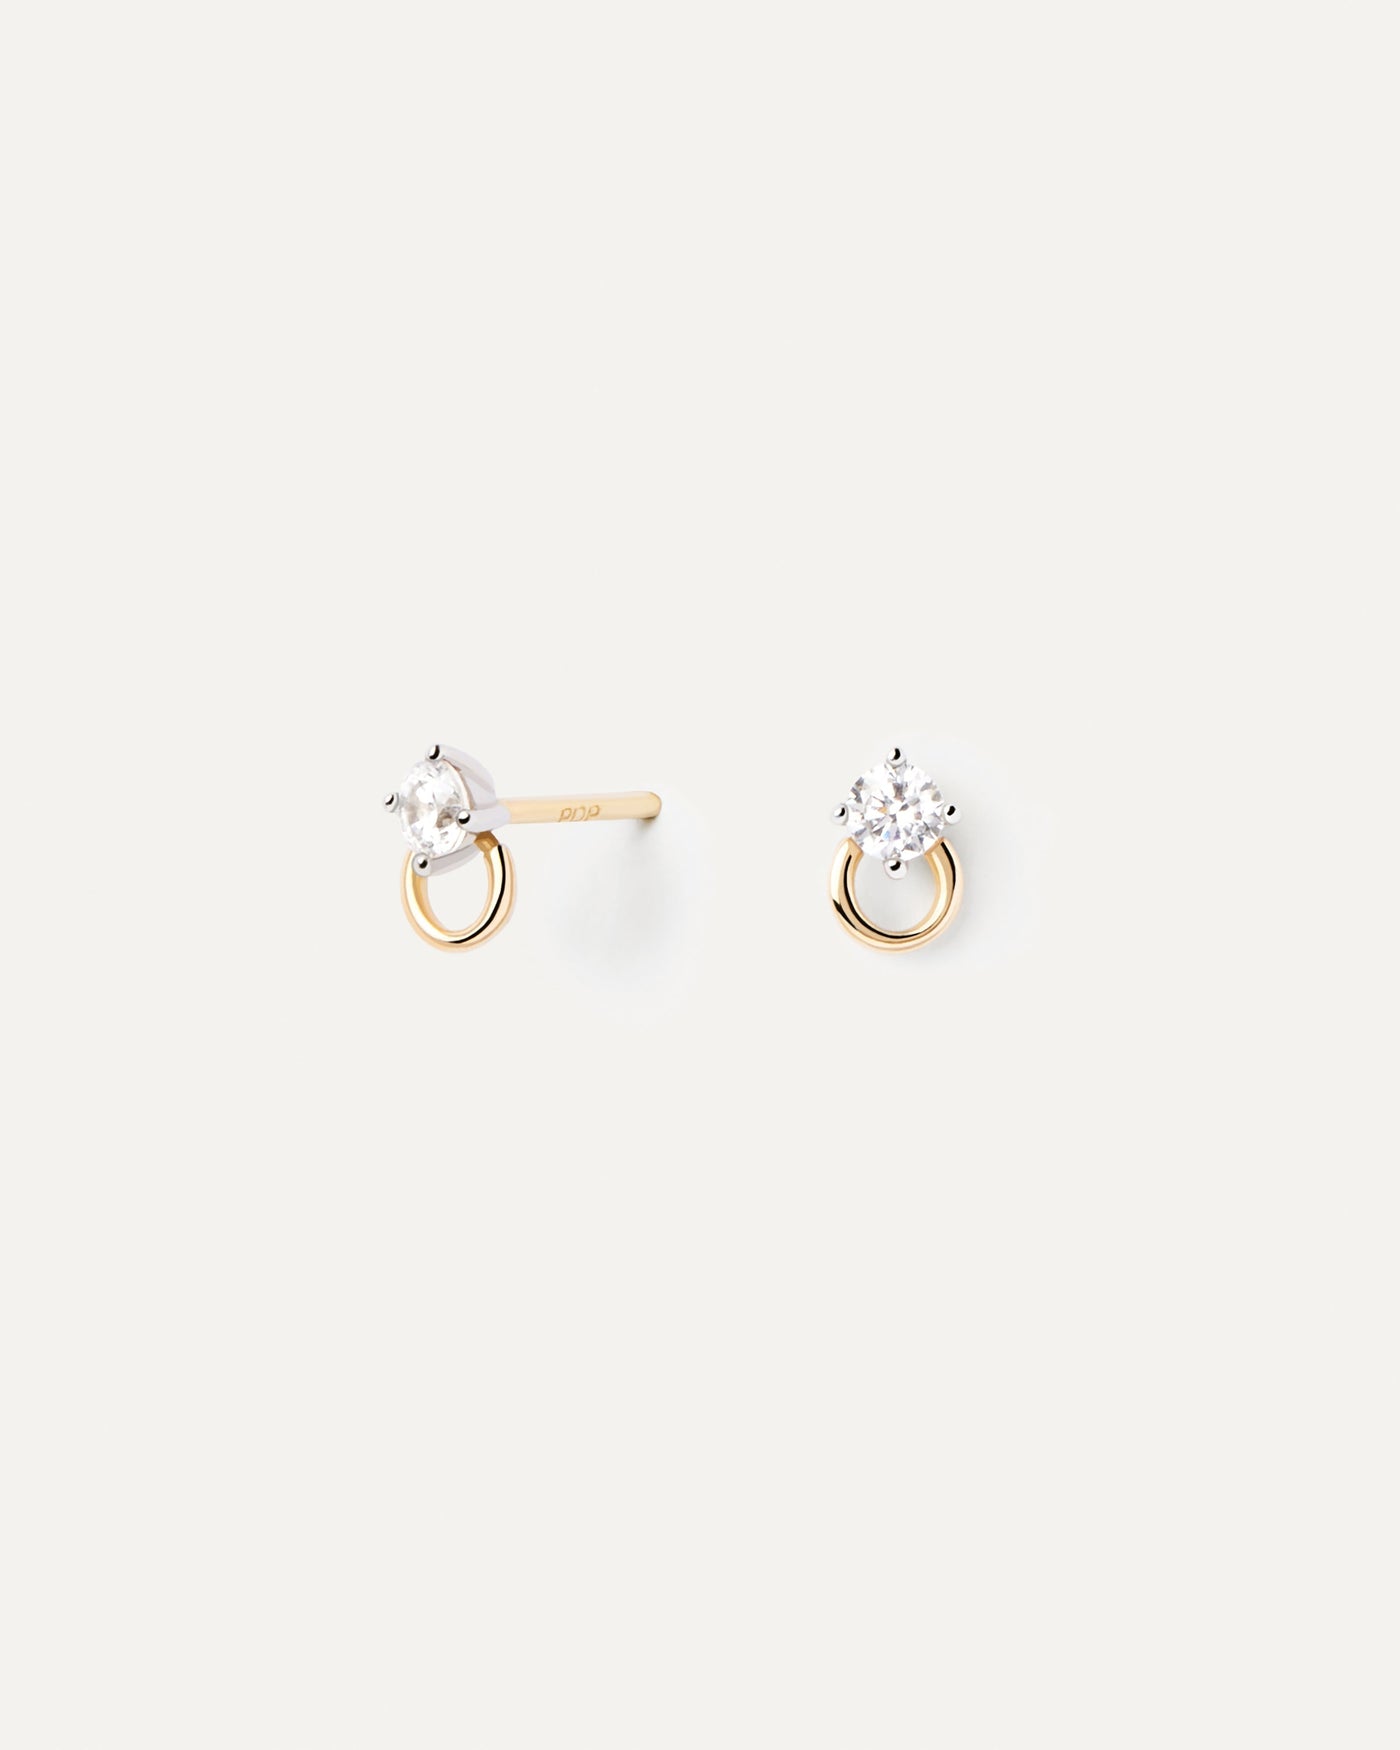 2023 Selection | Diamonds And Gold Ari Stud Earrings. Gold earrings with a round 0.1 carat diamond each and a gold circle. Get the latest arrival from PDPAOLA. Place your order safely and get this Best Seller. Free Shipping.